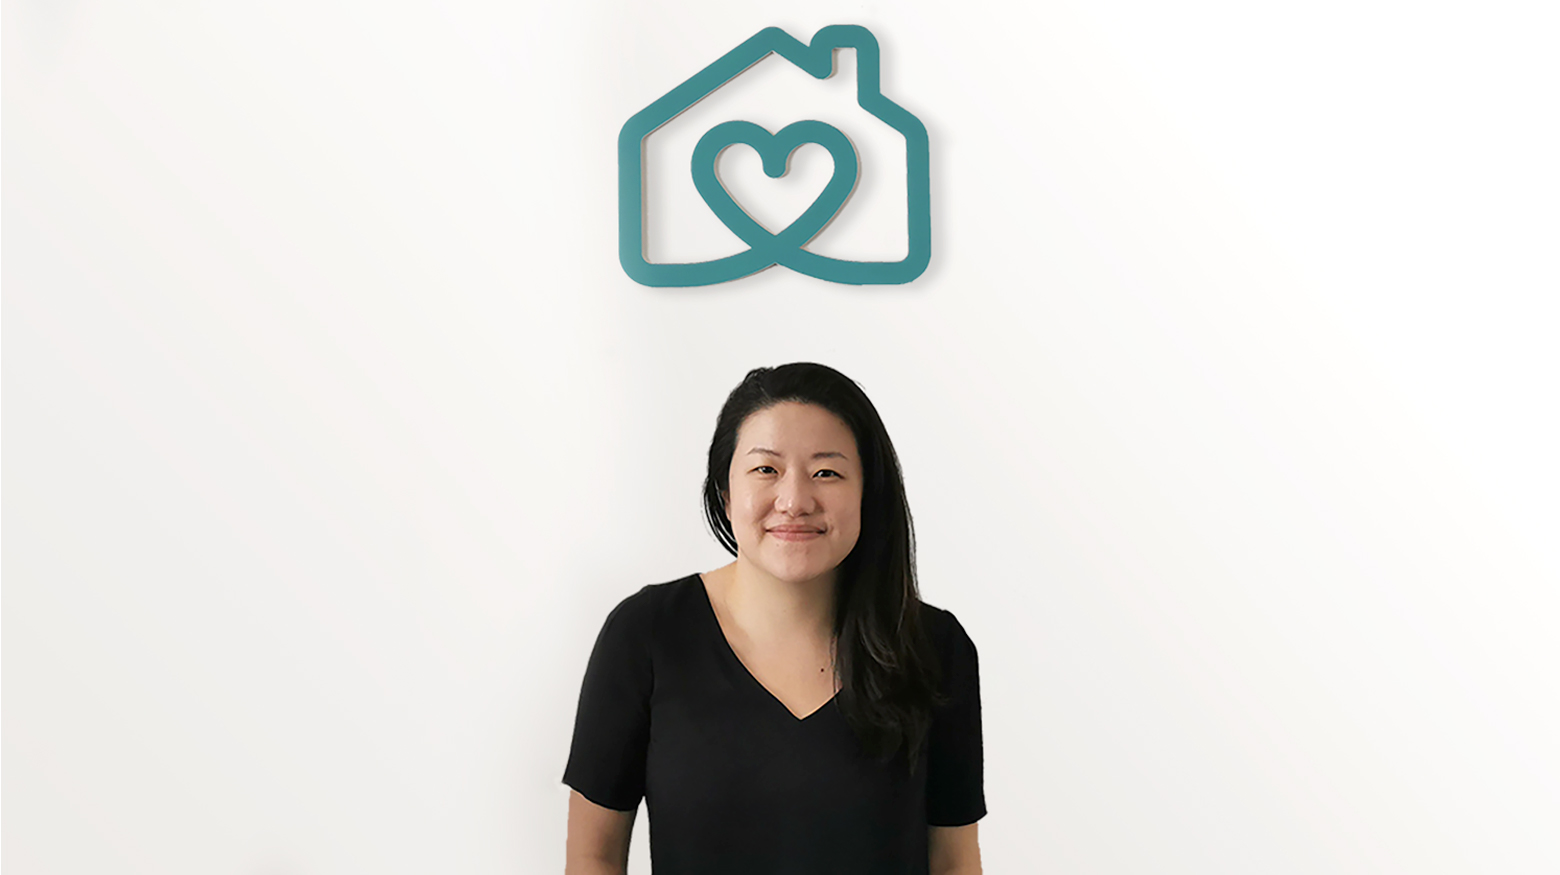 Daily Markup #623: Gillian Tee shares 4 tips that led Homage to over 1M caregiving hours and a US$100M+ valuation